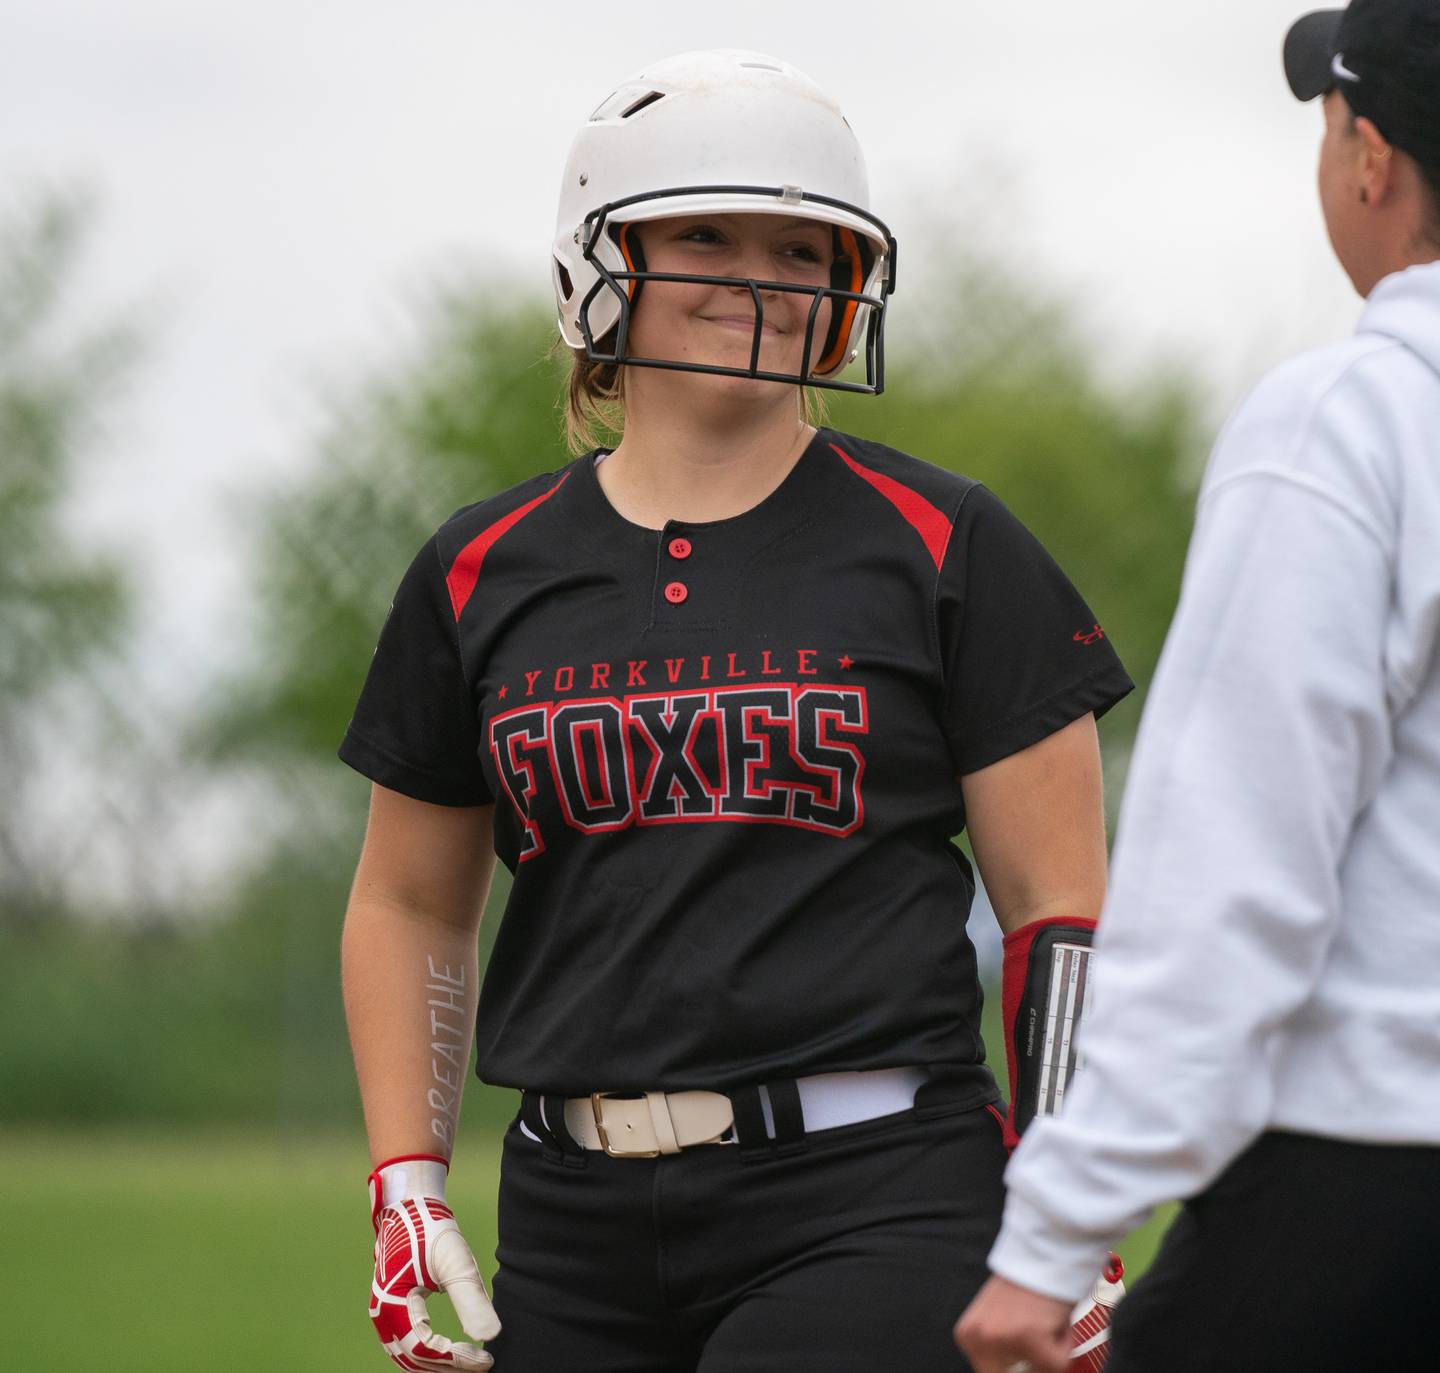 Yorkville's Lauren Koster (23) smiles after reaching first on a single against Plainfield North during the Class 4A Oswego East Regional softball final at Oswego East High School on Friday, May 27, 2022.